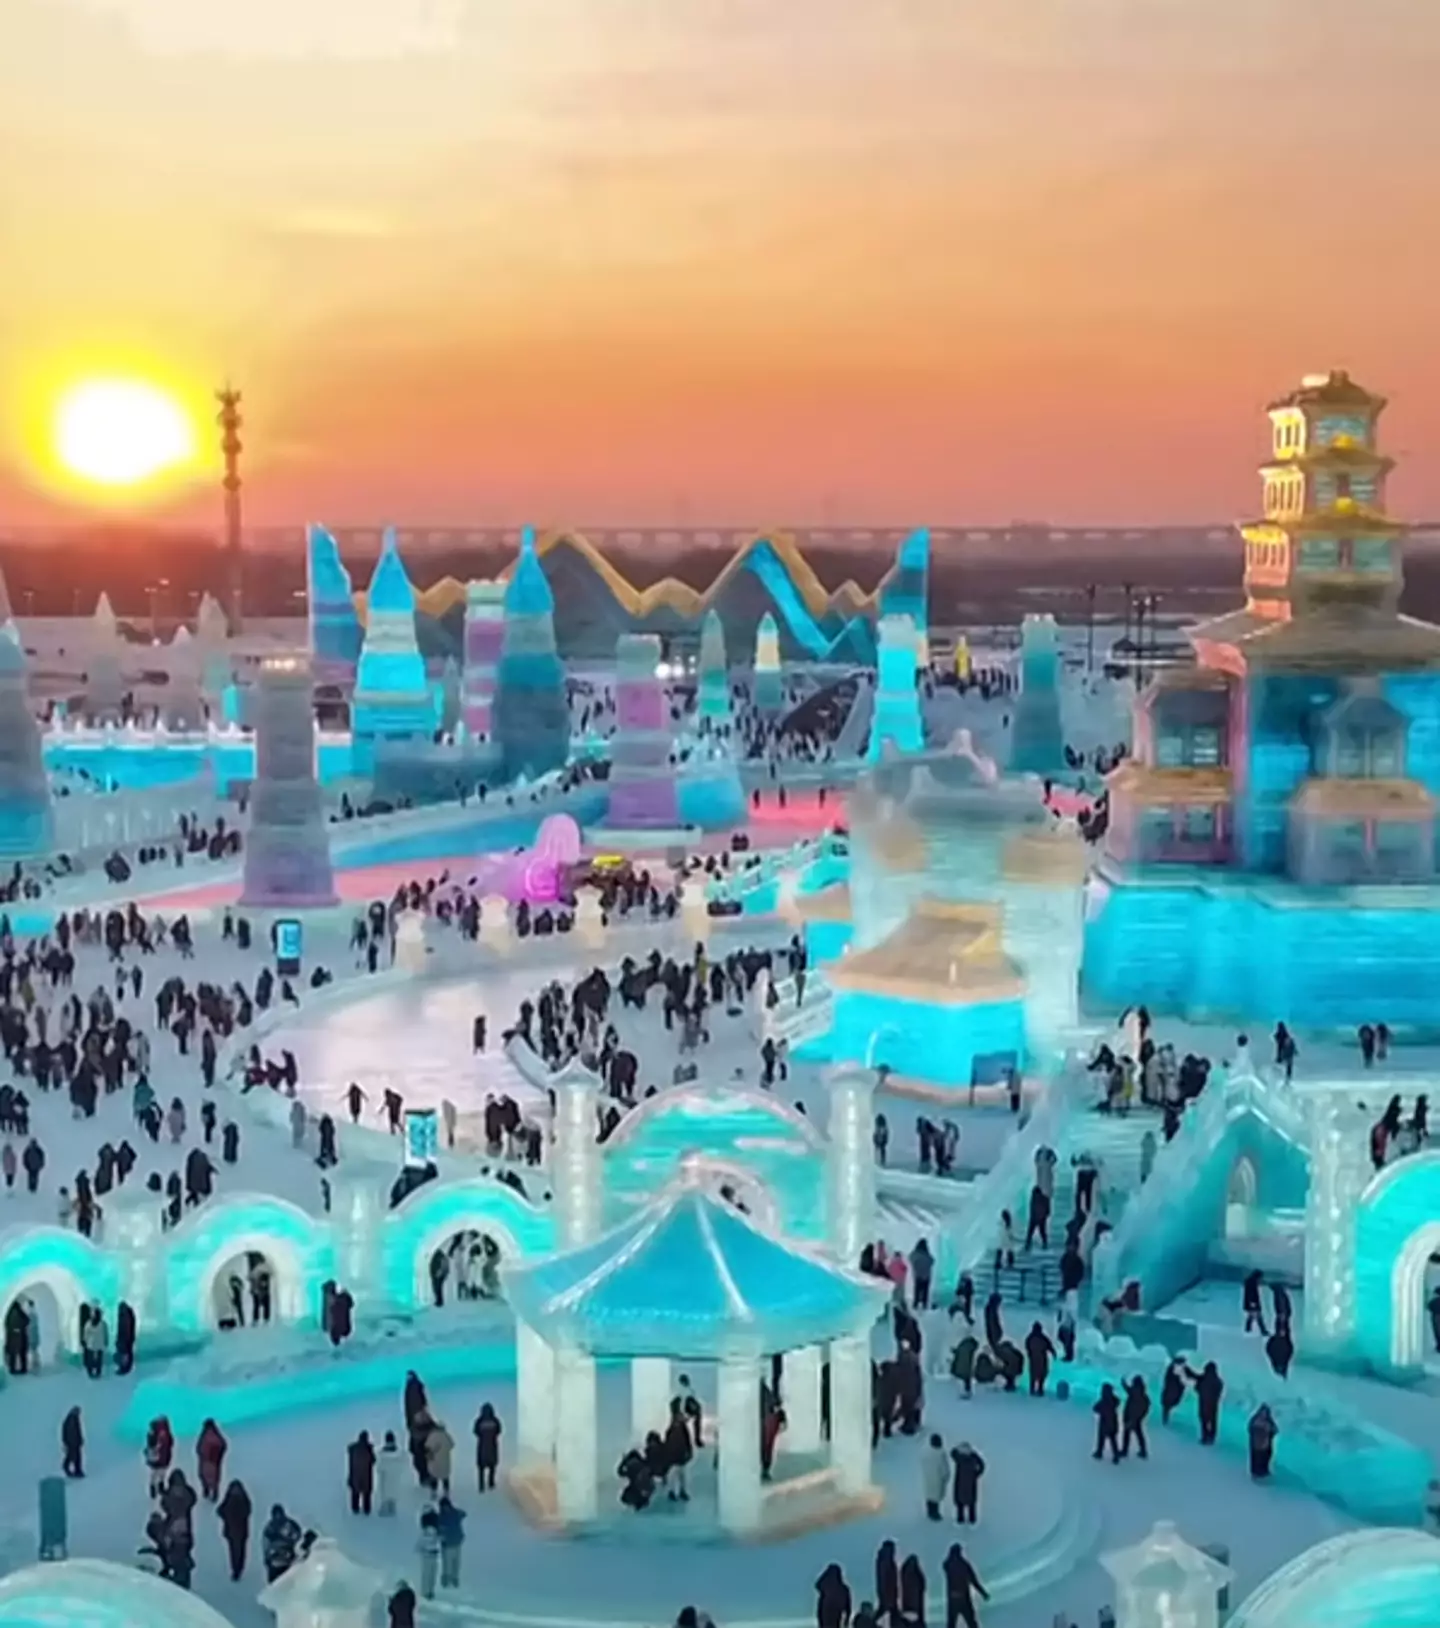 China's ice city brough in 3 million tourists over the New Year weekend / Xinhua News Agency